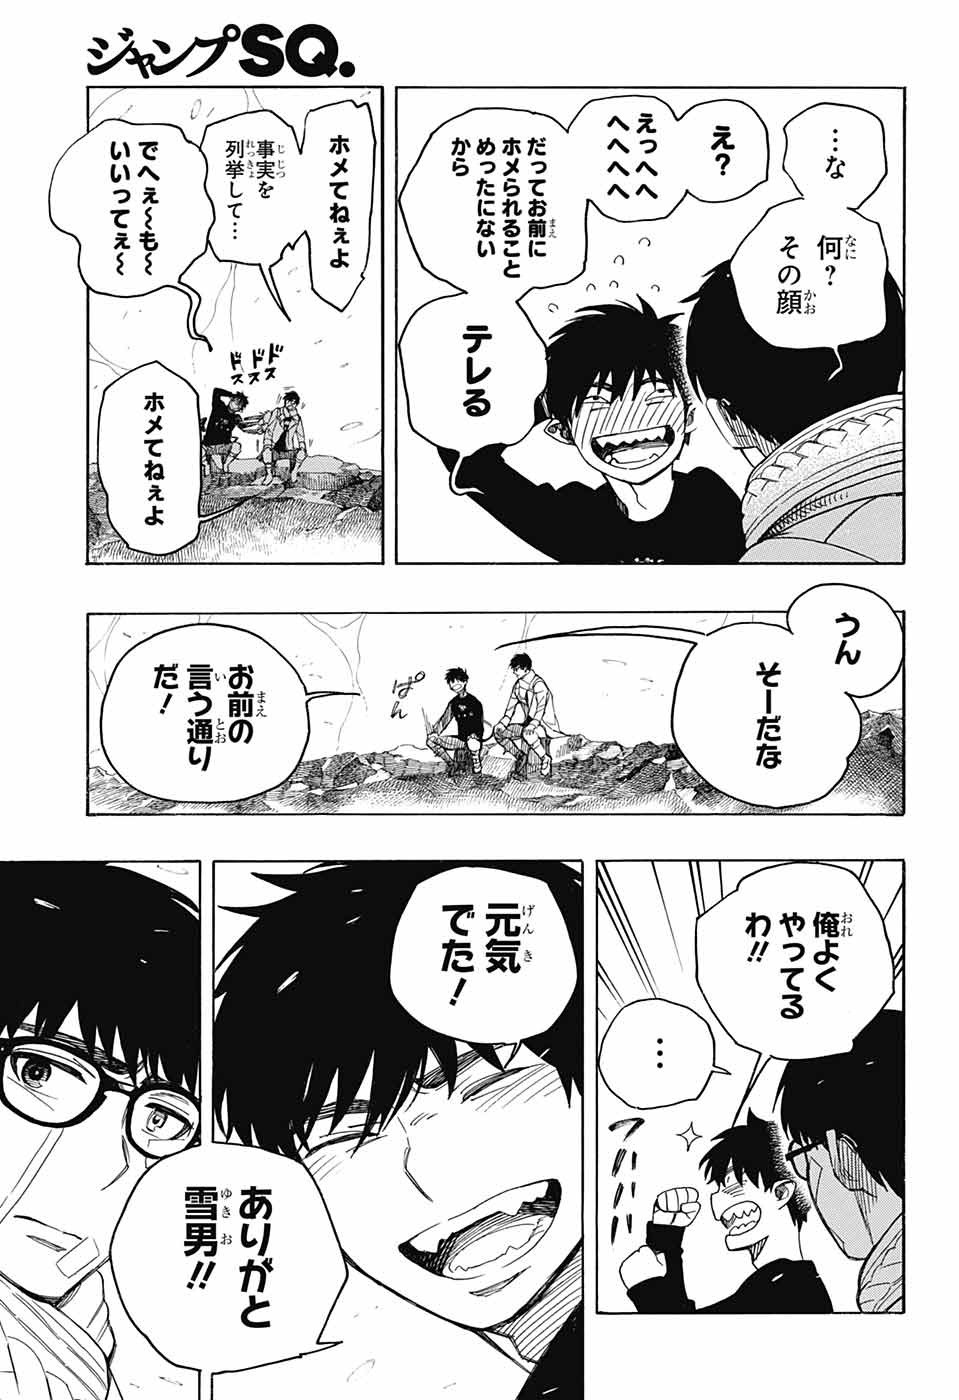 Ao no Exorcist - Chapter 143 - Page 34